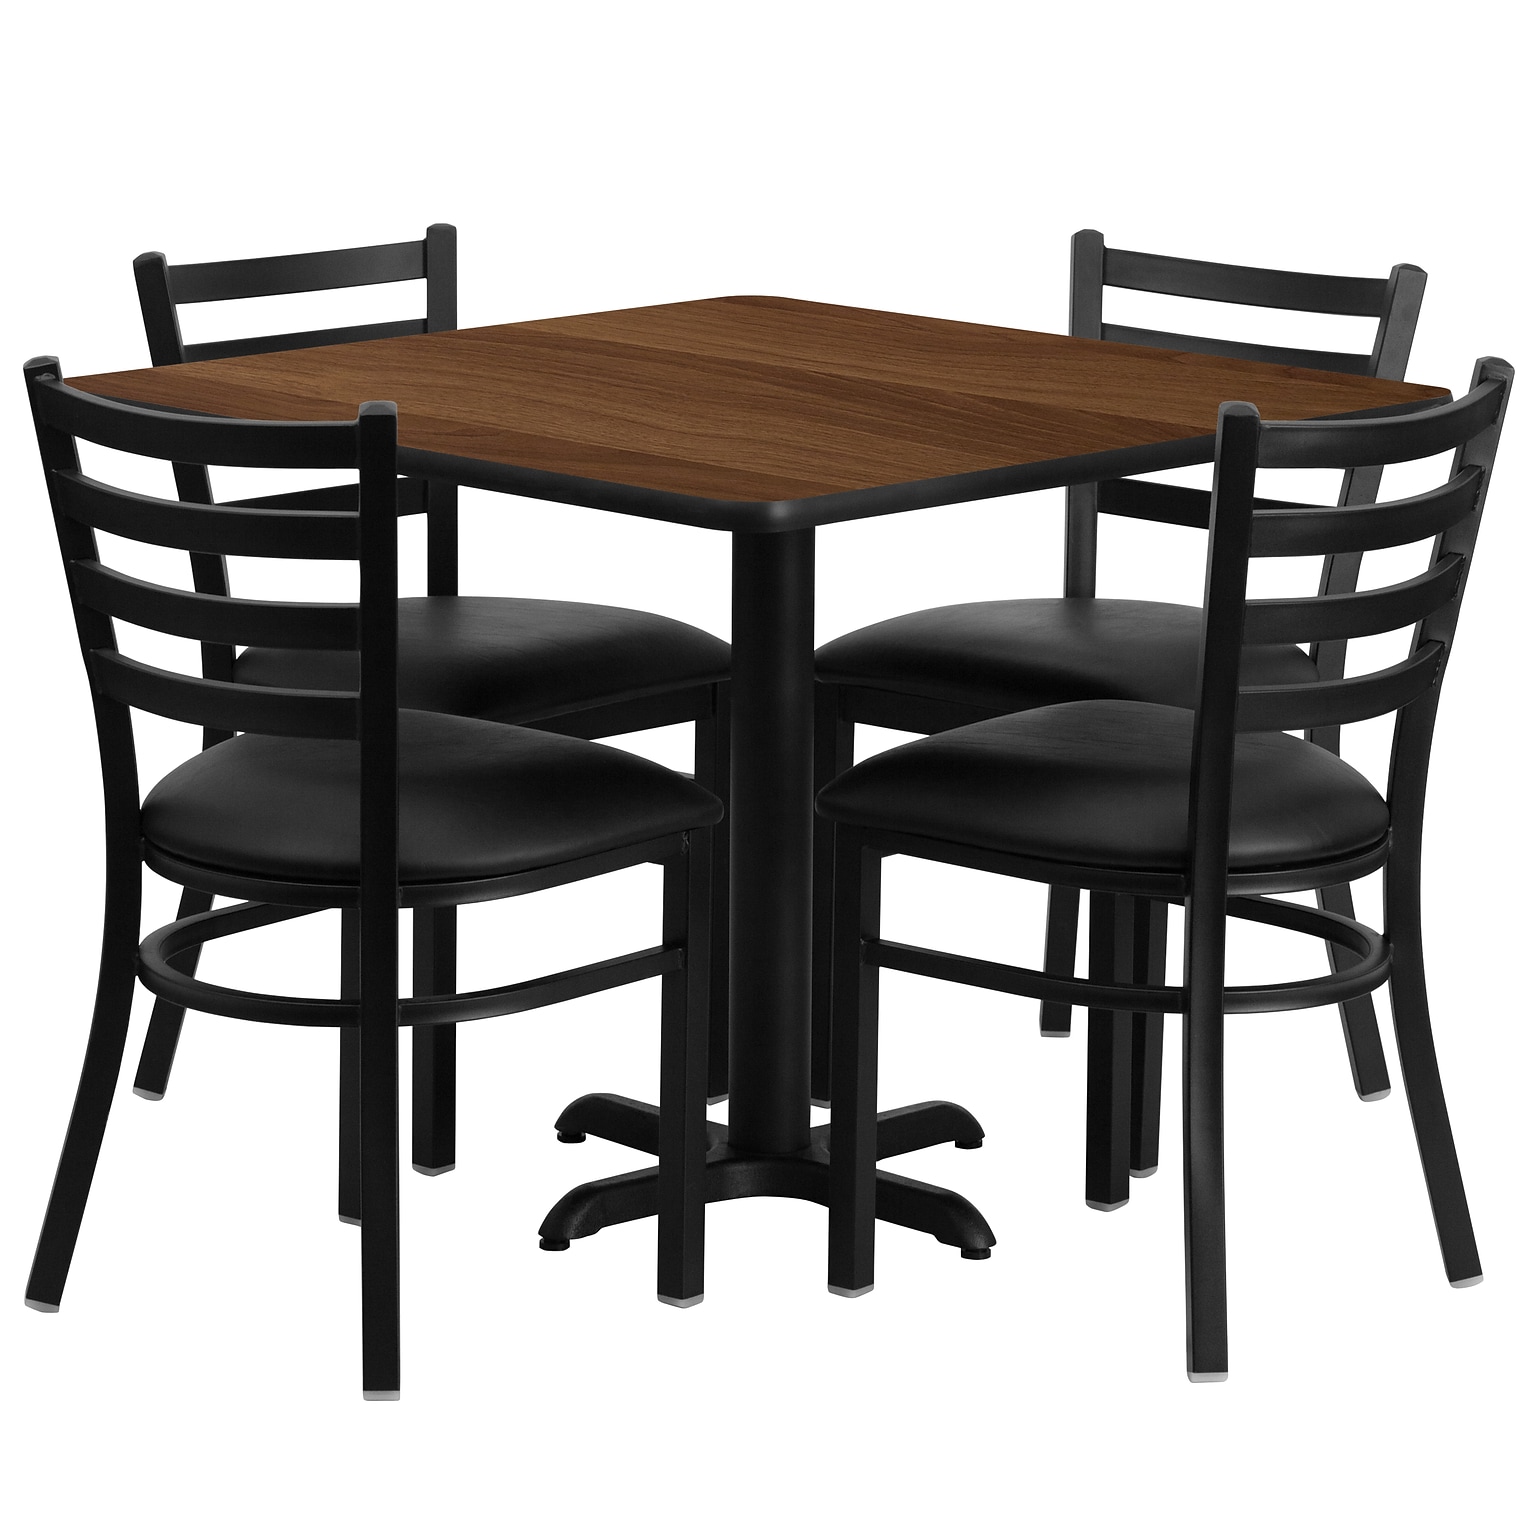 Flash Furniture 36 Square Walnut Laminate Table Set With 4 Ladder Back Metal Chairs, Black (HDBF1016)